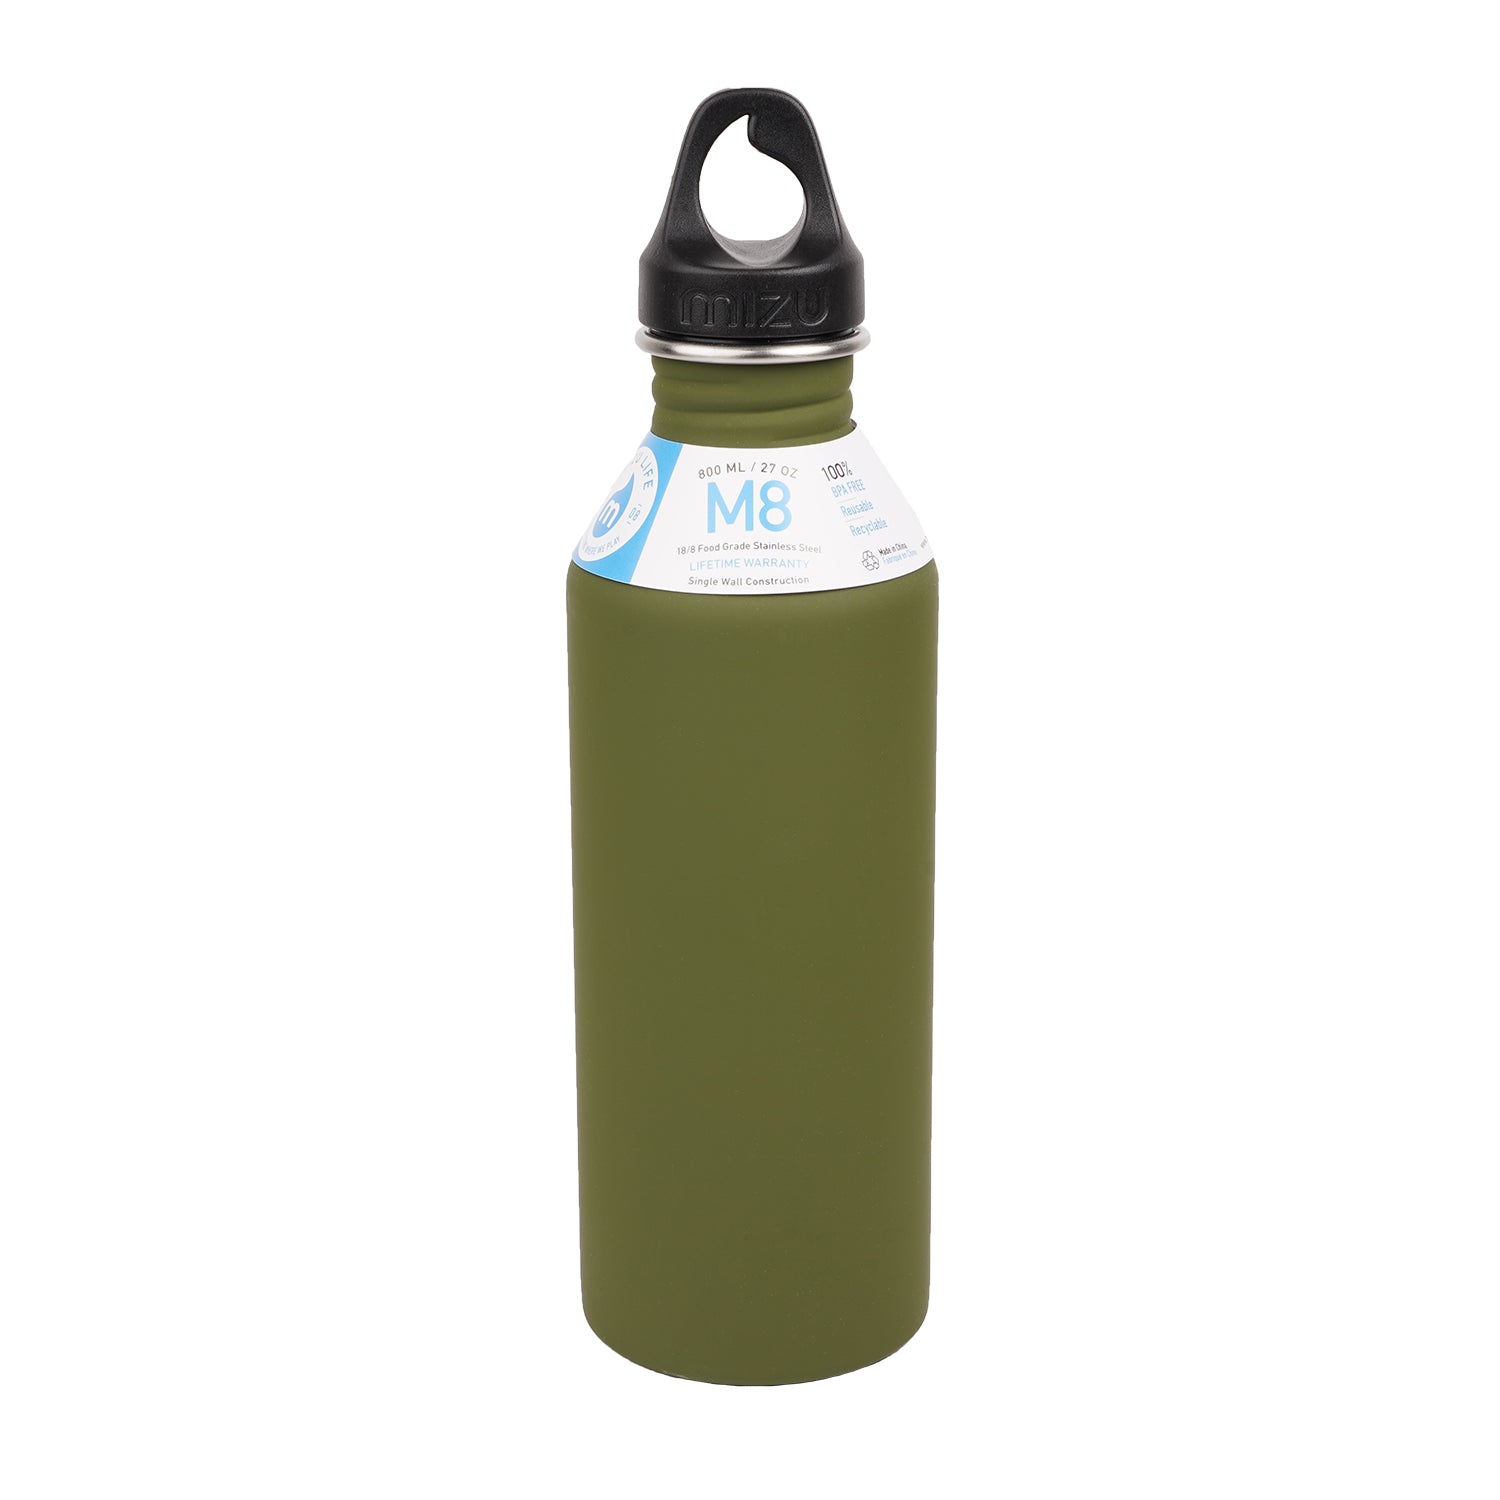 800 ml single wall stainless steel bottle with a black loop cap.  The M8 stainless steel bottle from Mizu has the perfect size and will fit perfect in your car or in your sports bag.